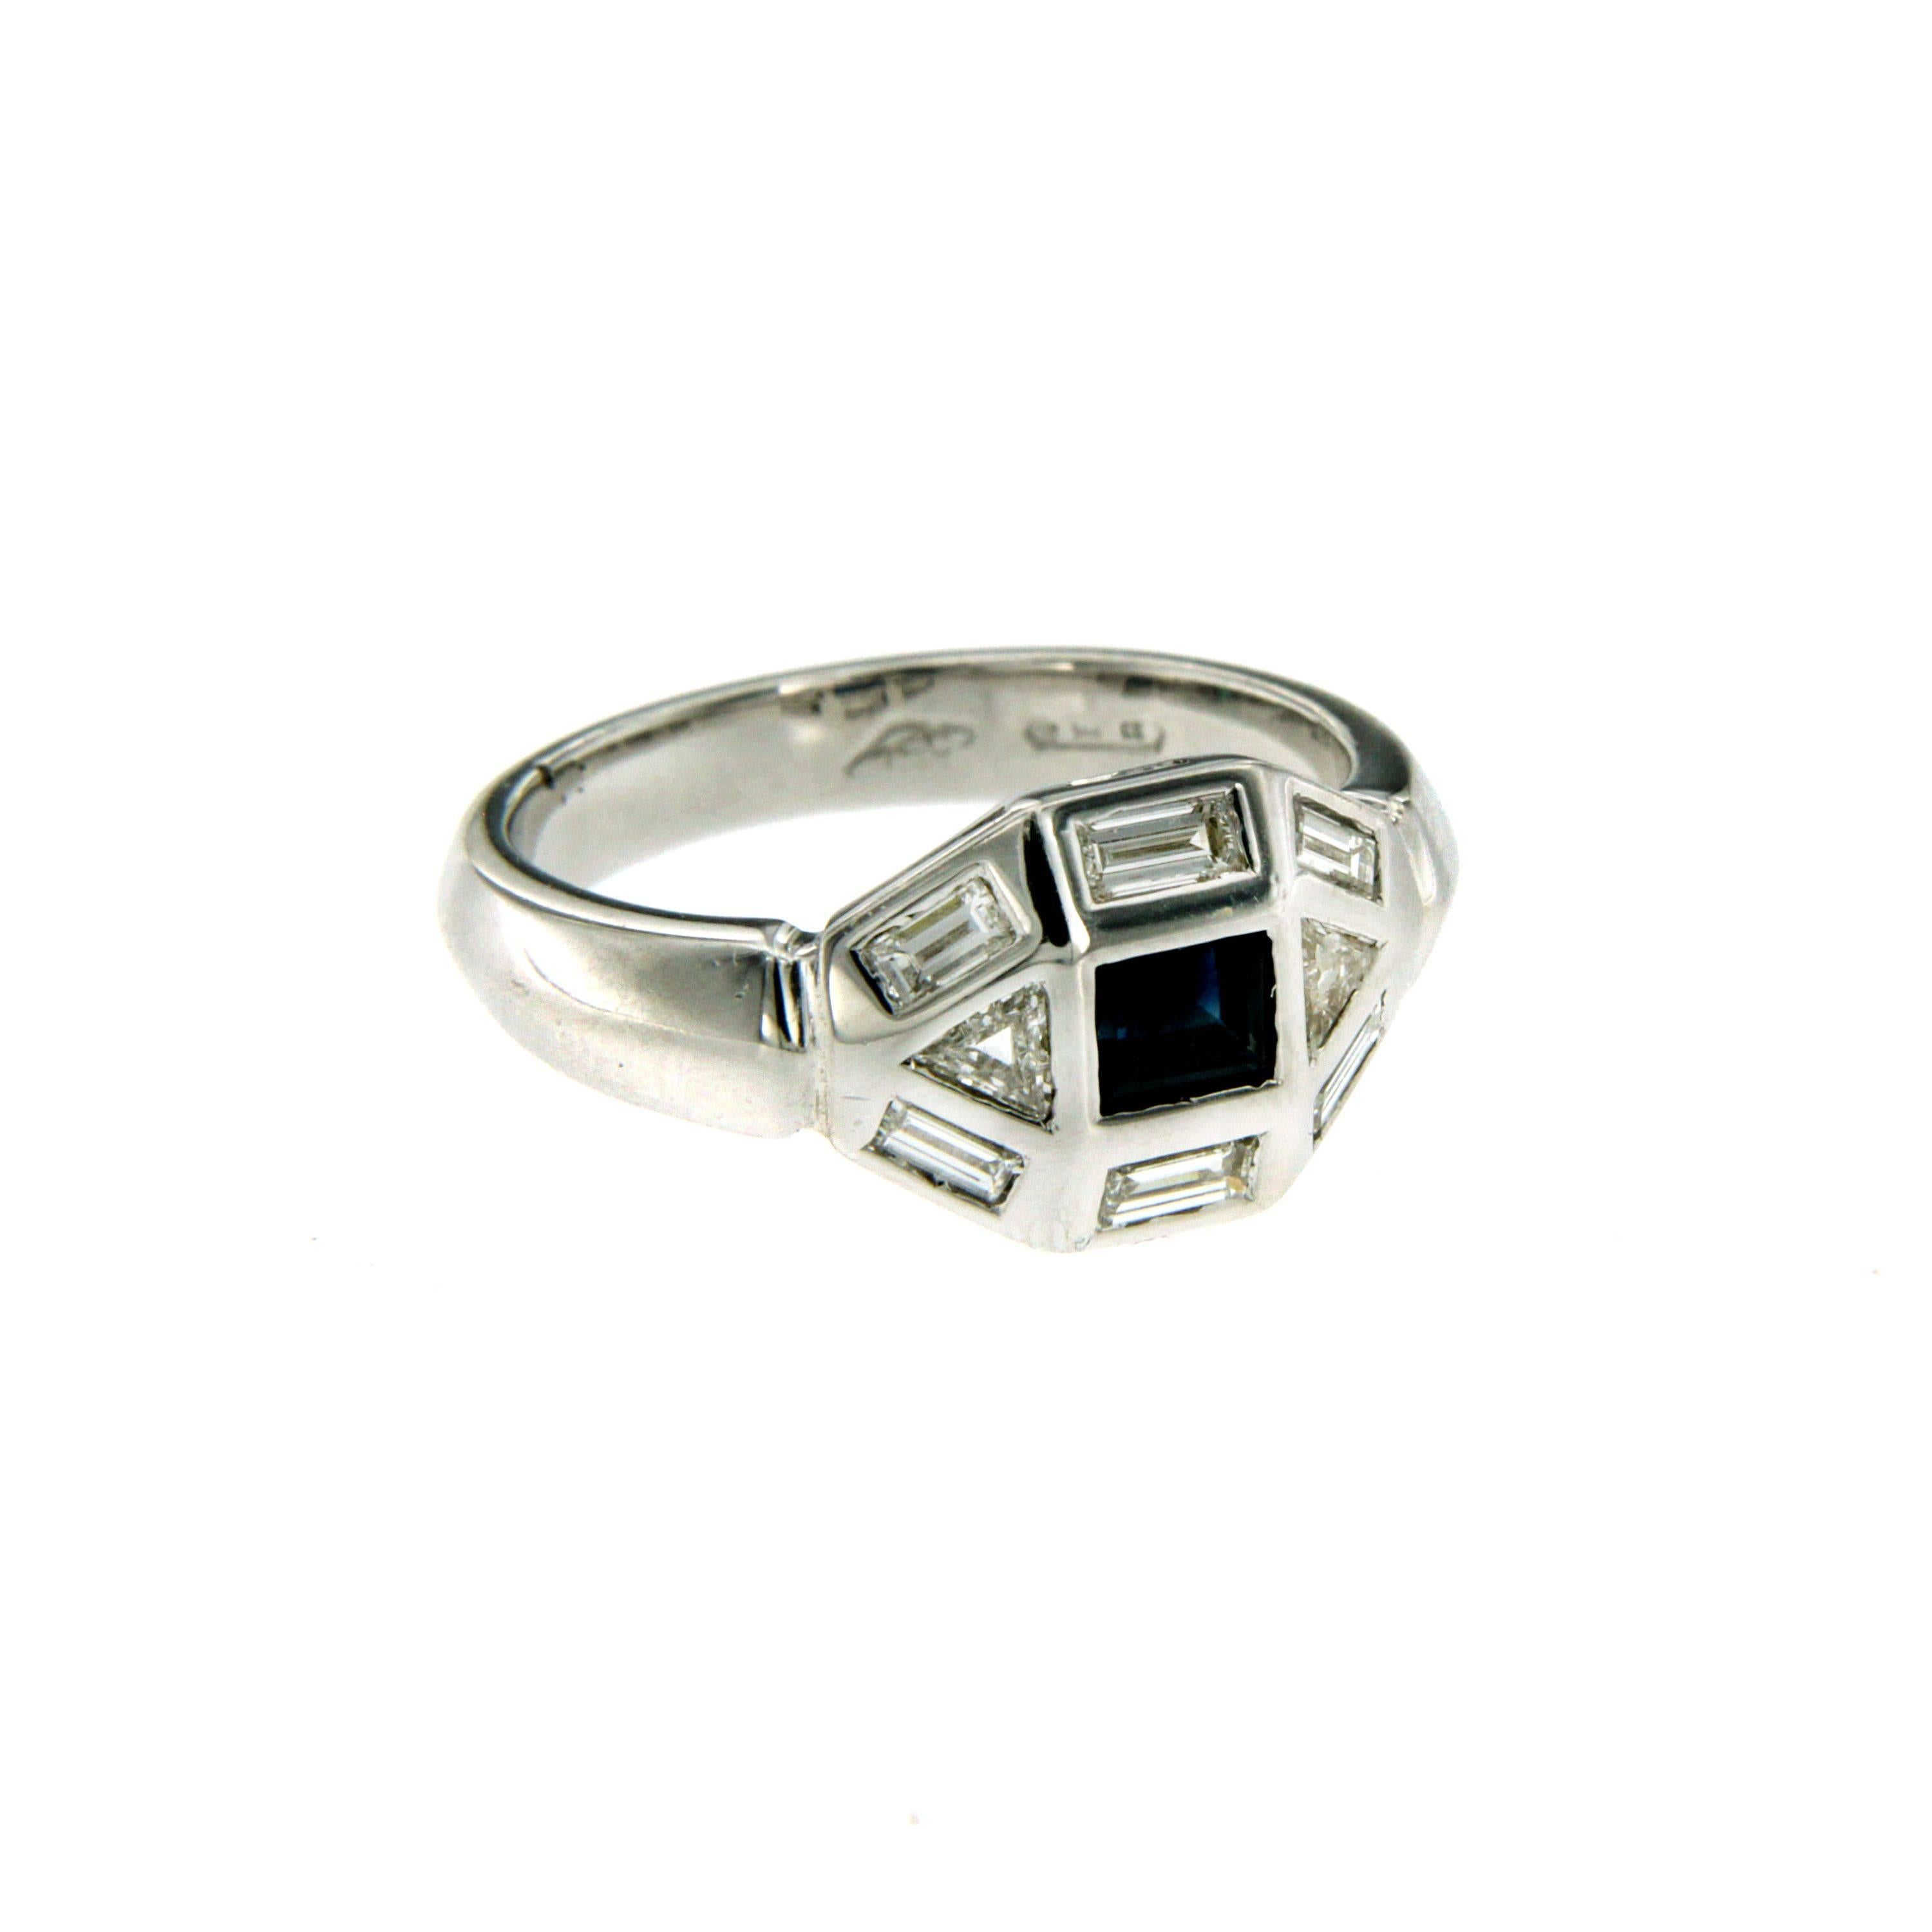 An art deco sapphire and diamond ring set in 18k gold. The ring is set with six baguette cut diamonds and two trillon diamonds framing the 0.30 ct natural sapphire. Circa 1930

CONDITION: Pre-Owned - Excellent 
METAL: 18k Gold
GEM STONE: Diamond